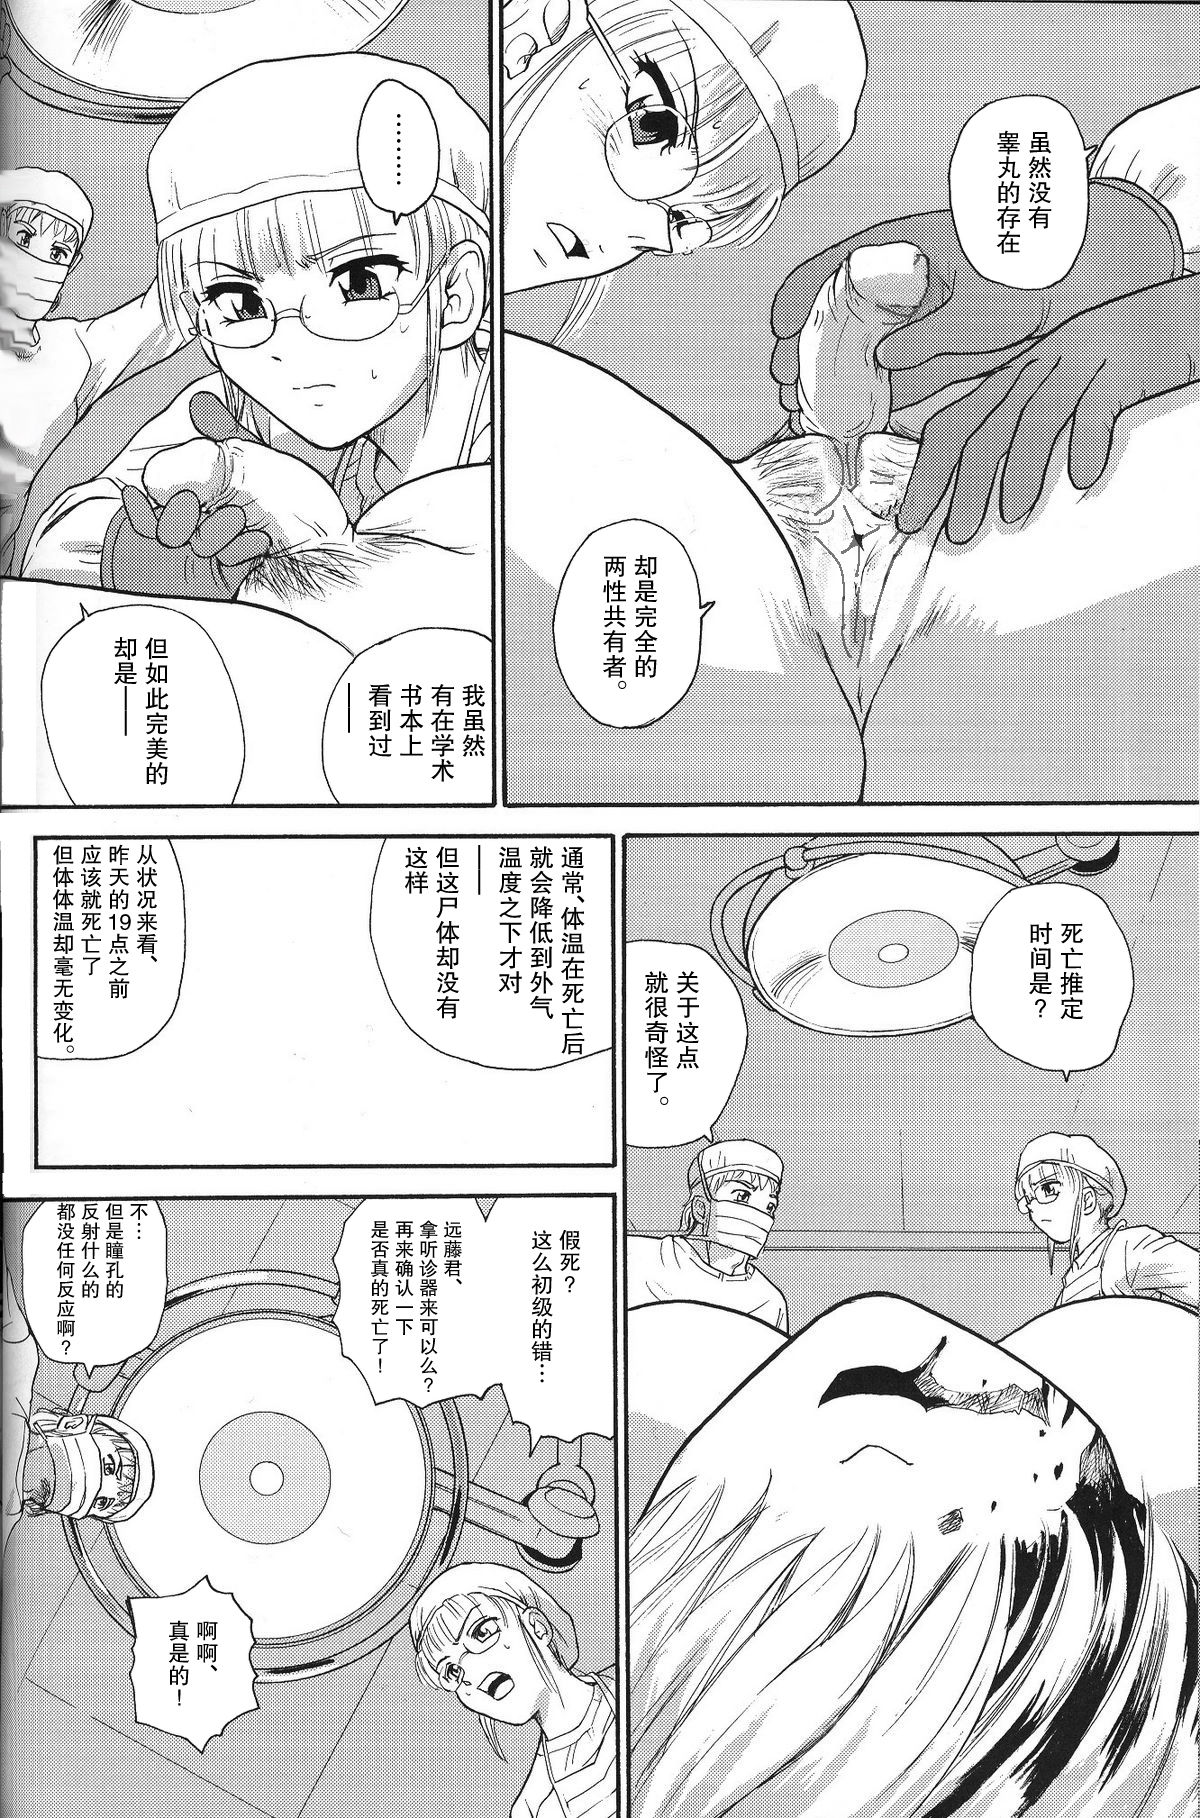 (C71) [Behind Moon (Q)] Dulce Report 8 | 达西报告 8 [Chinese] [哈尼喵汉化组] [Decensored] page 37 full